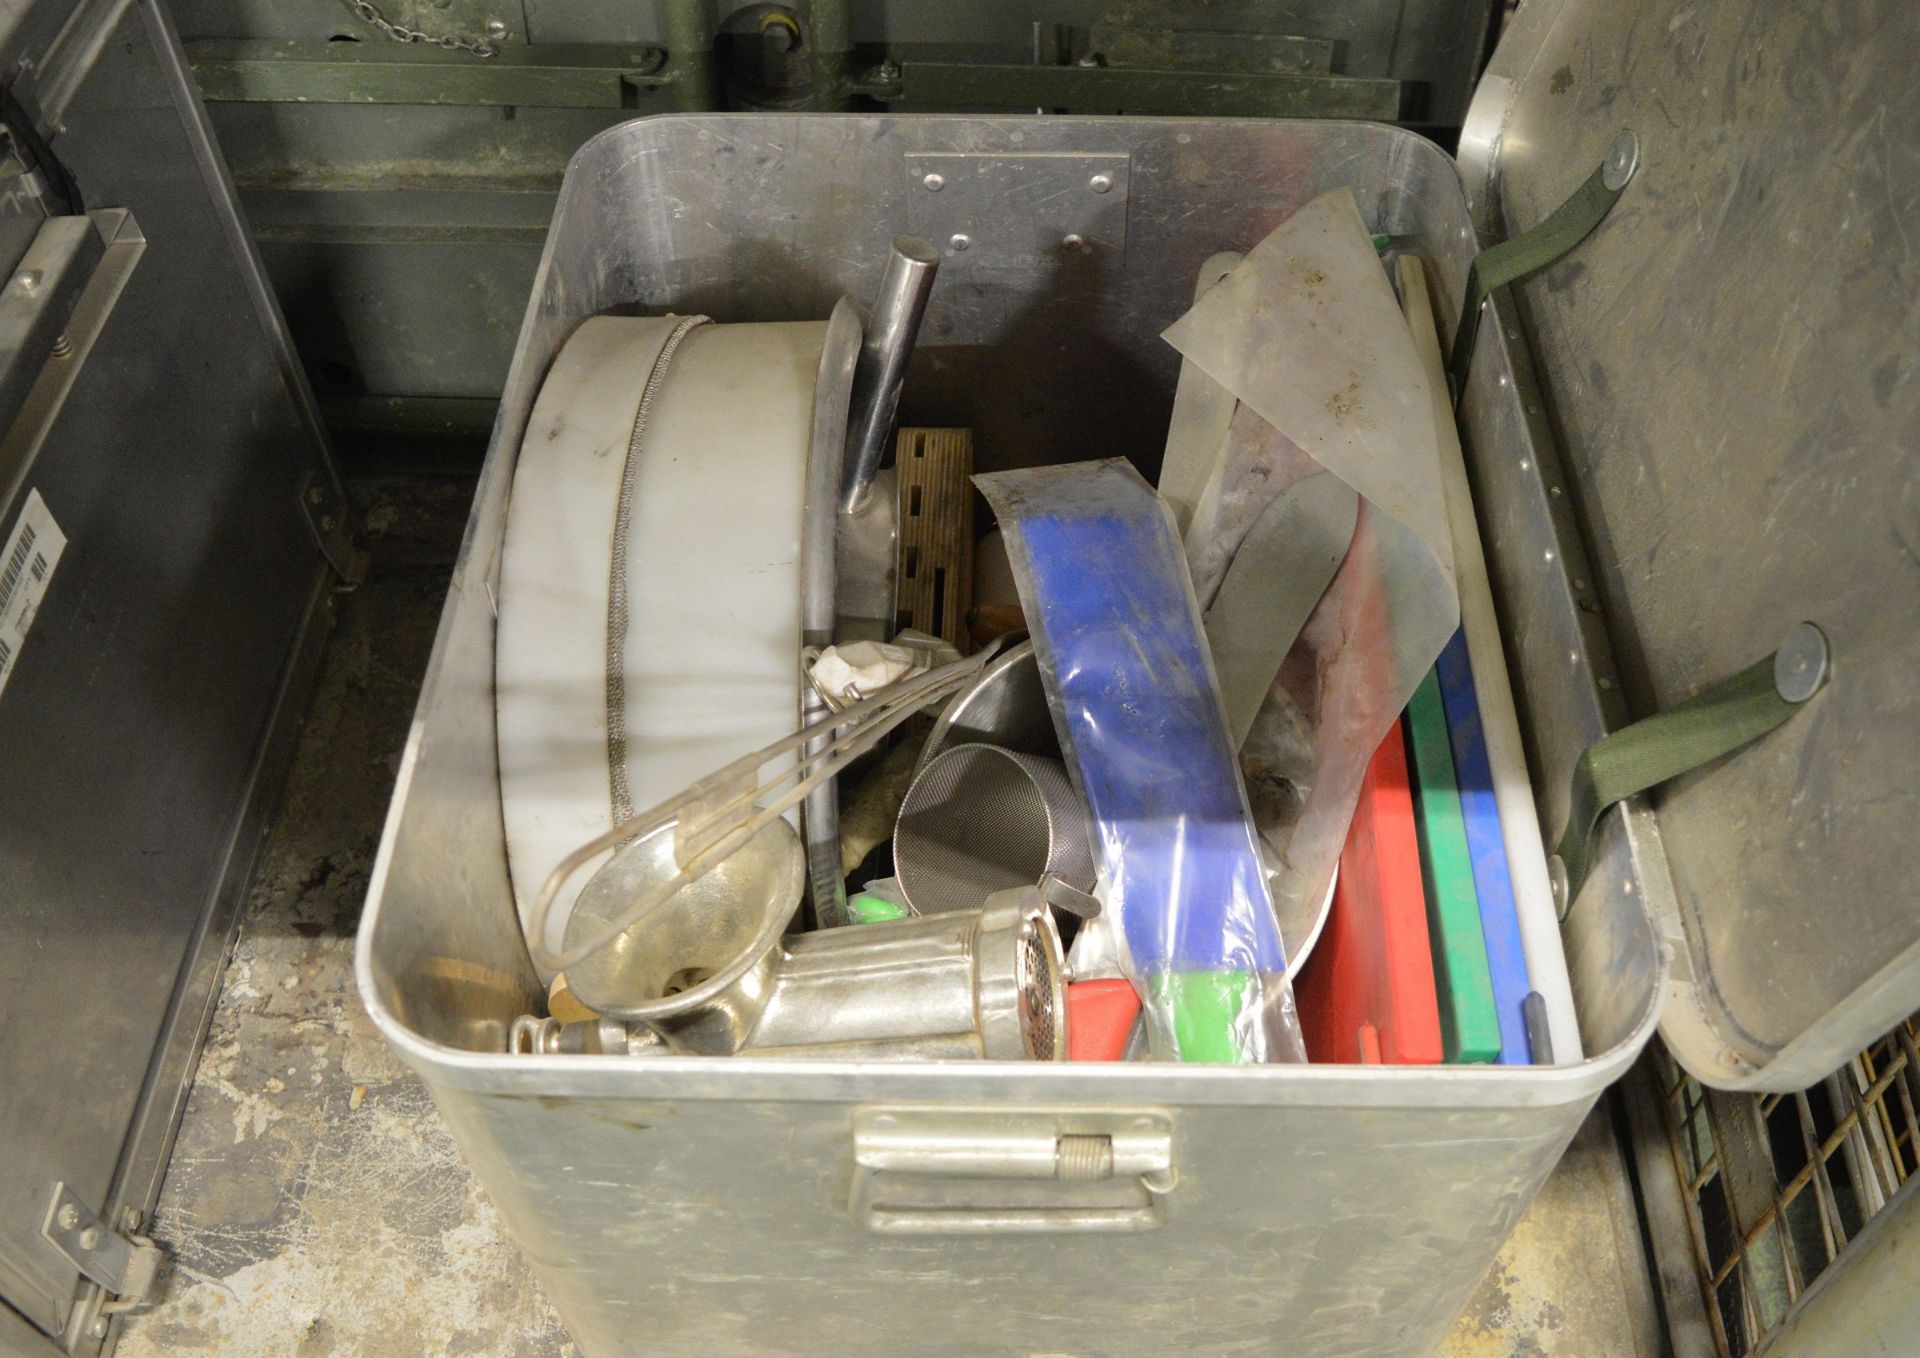 Field Catering Kit - Cooker. Oven, Utensils in storage box, pots, pans, fire blanket box - Image 5 of 6